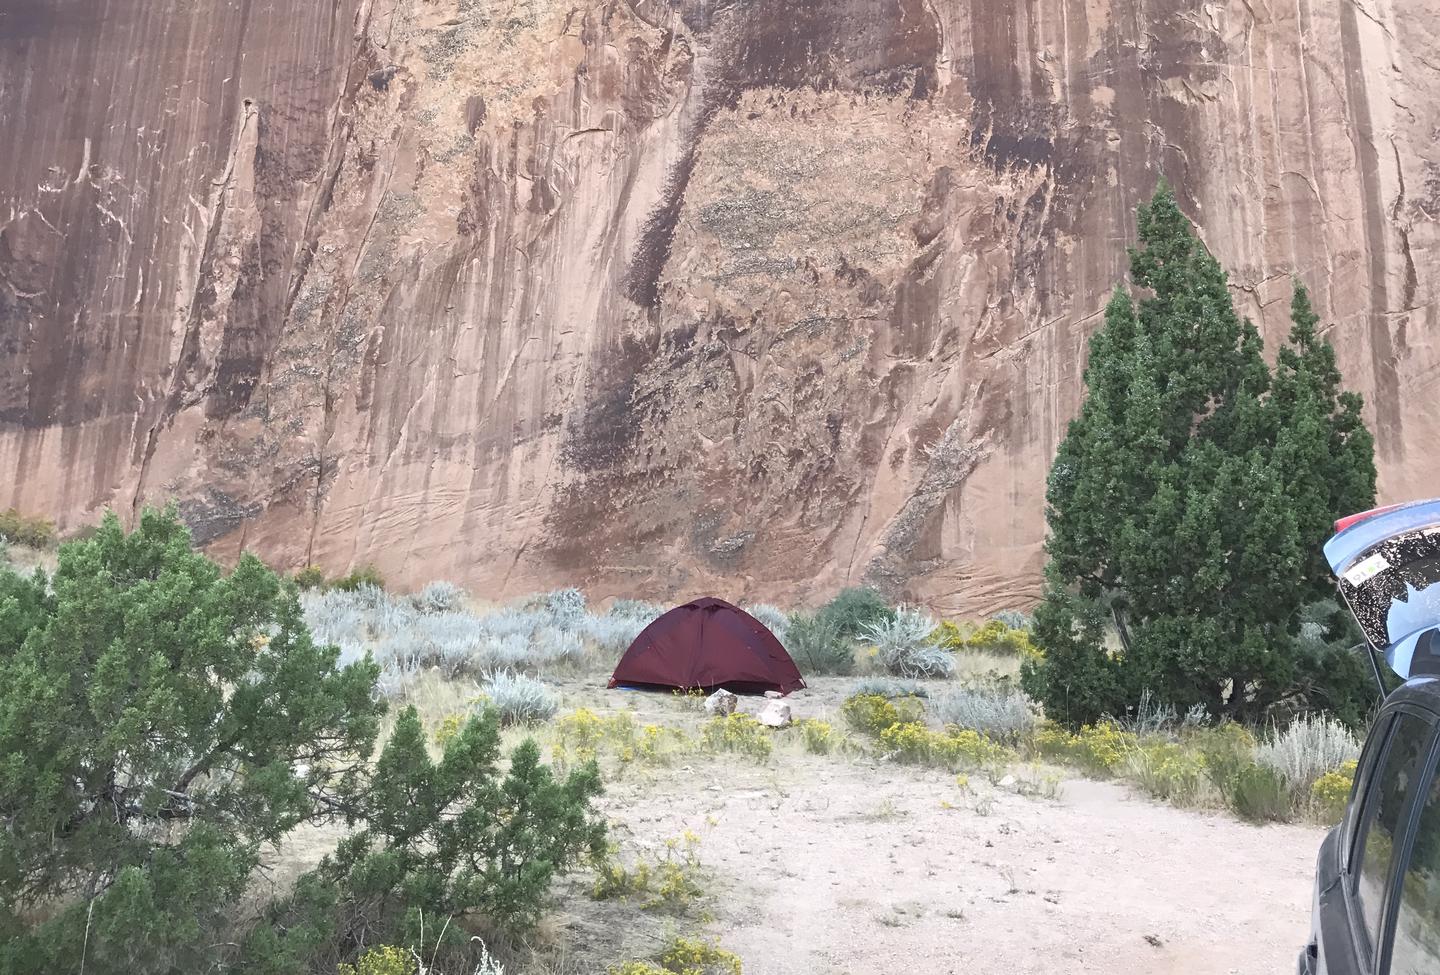 A small marron tent at the base of a towering cliff in Echo Park Campground.Campsite in Echo Park.